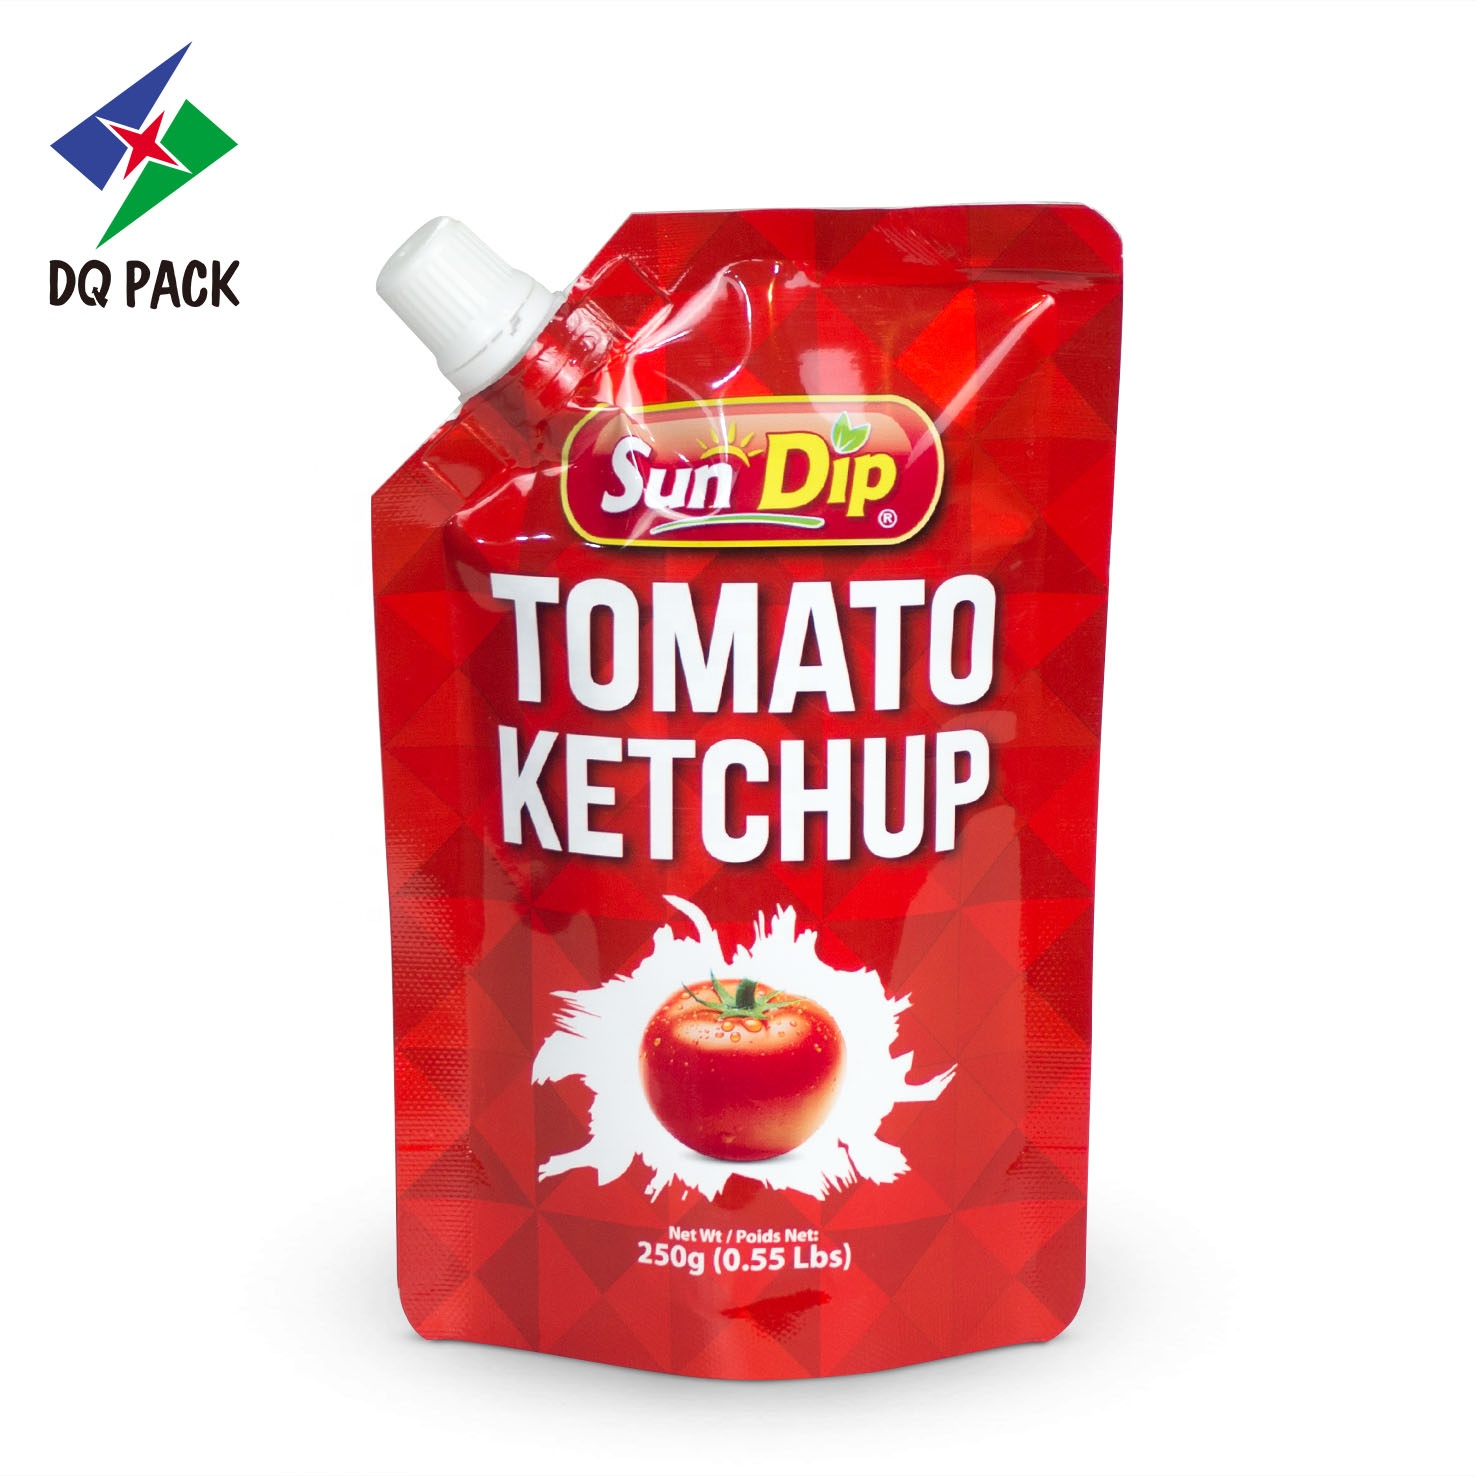 DQ PACK juice tomato sauce ketchup doypack with corner spout